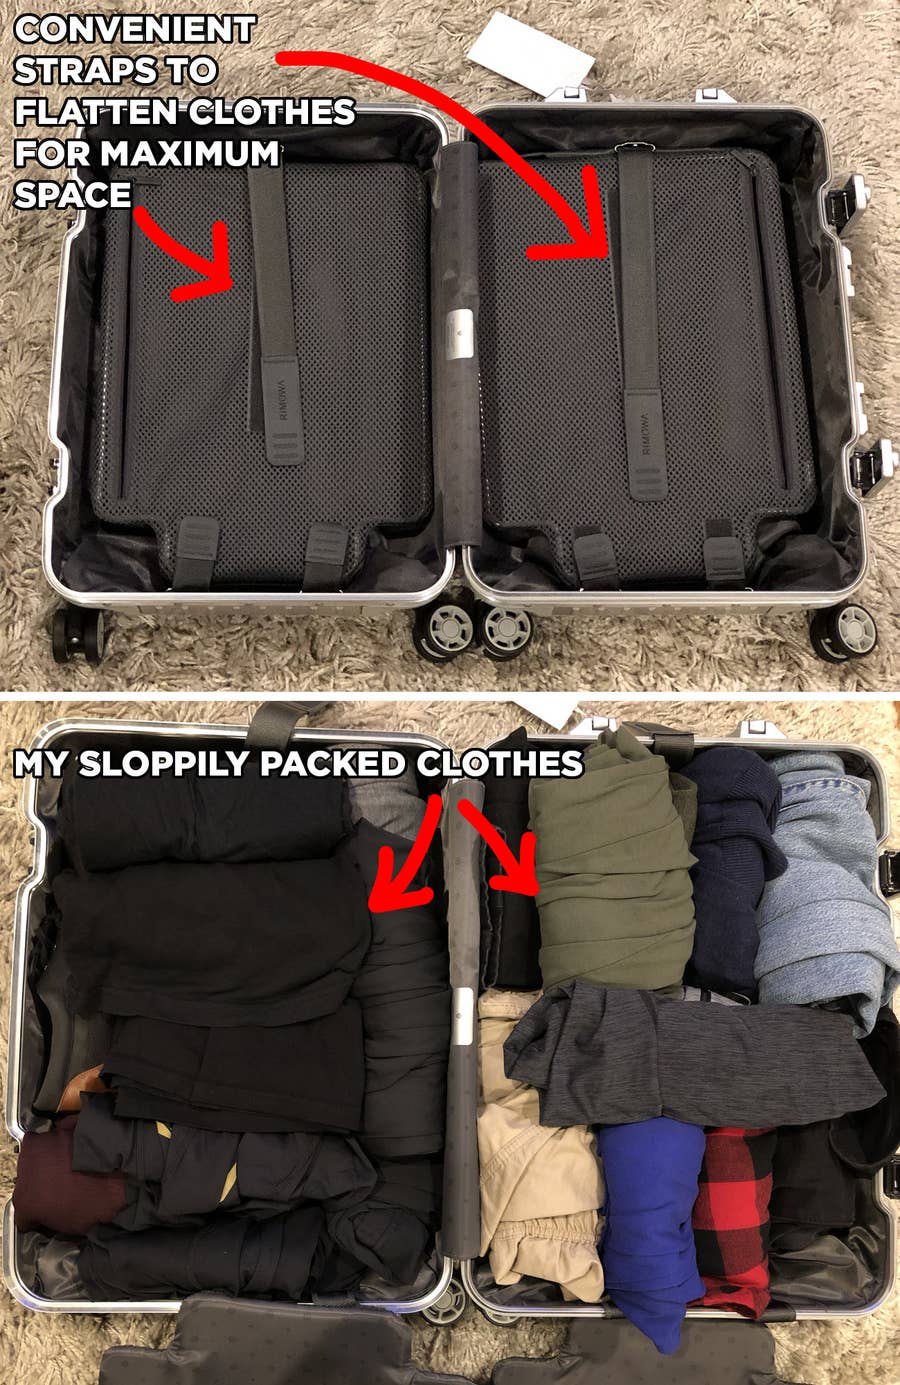 I Tried The Rimowa Luggage LeBron James Uses And Here's How It Is